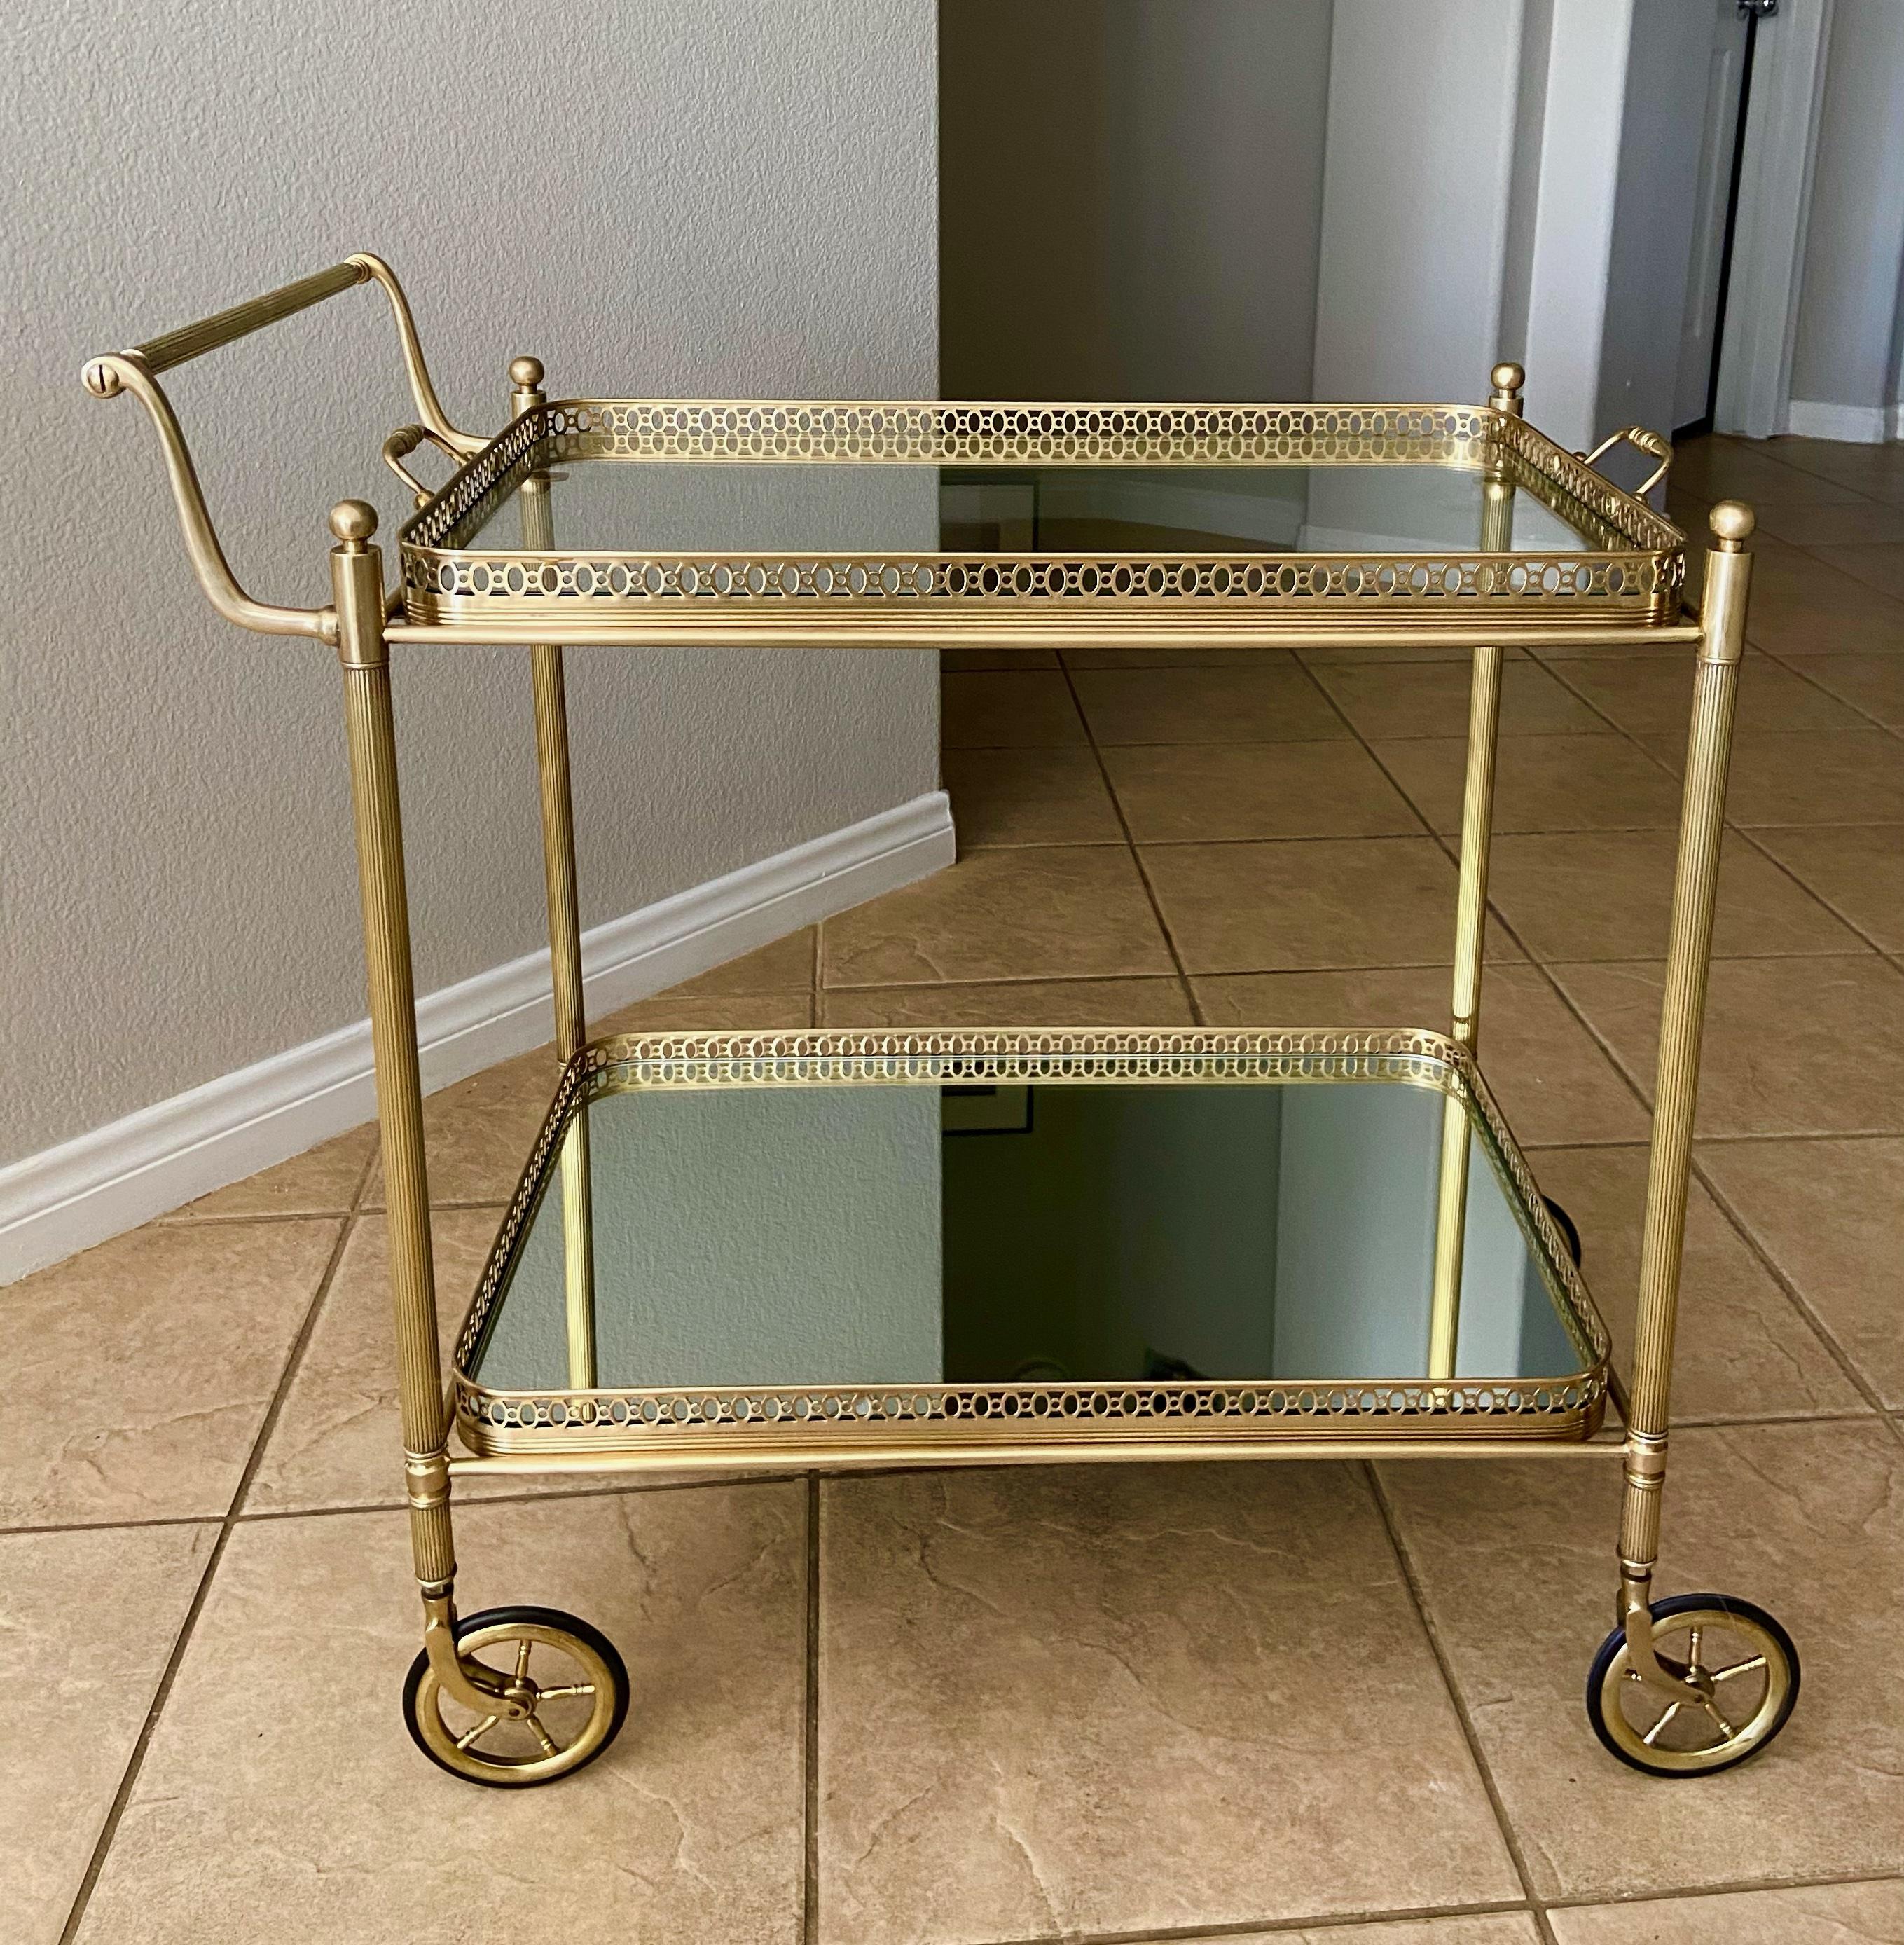 French brass bar cart with two-tier glass inset shelves, bottom shelf has mirrored glass, the top shelf has clear glass. Great detailing including reeded legs, pierced trays and solid brass casters. Top self can be removed and used a service tray